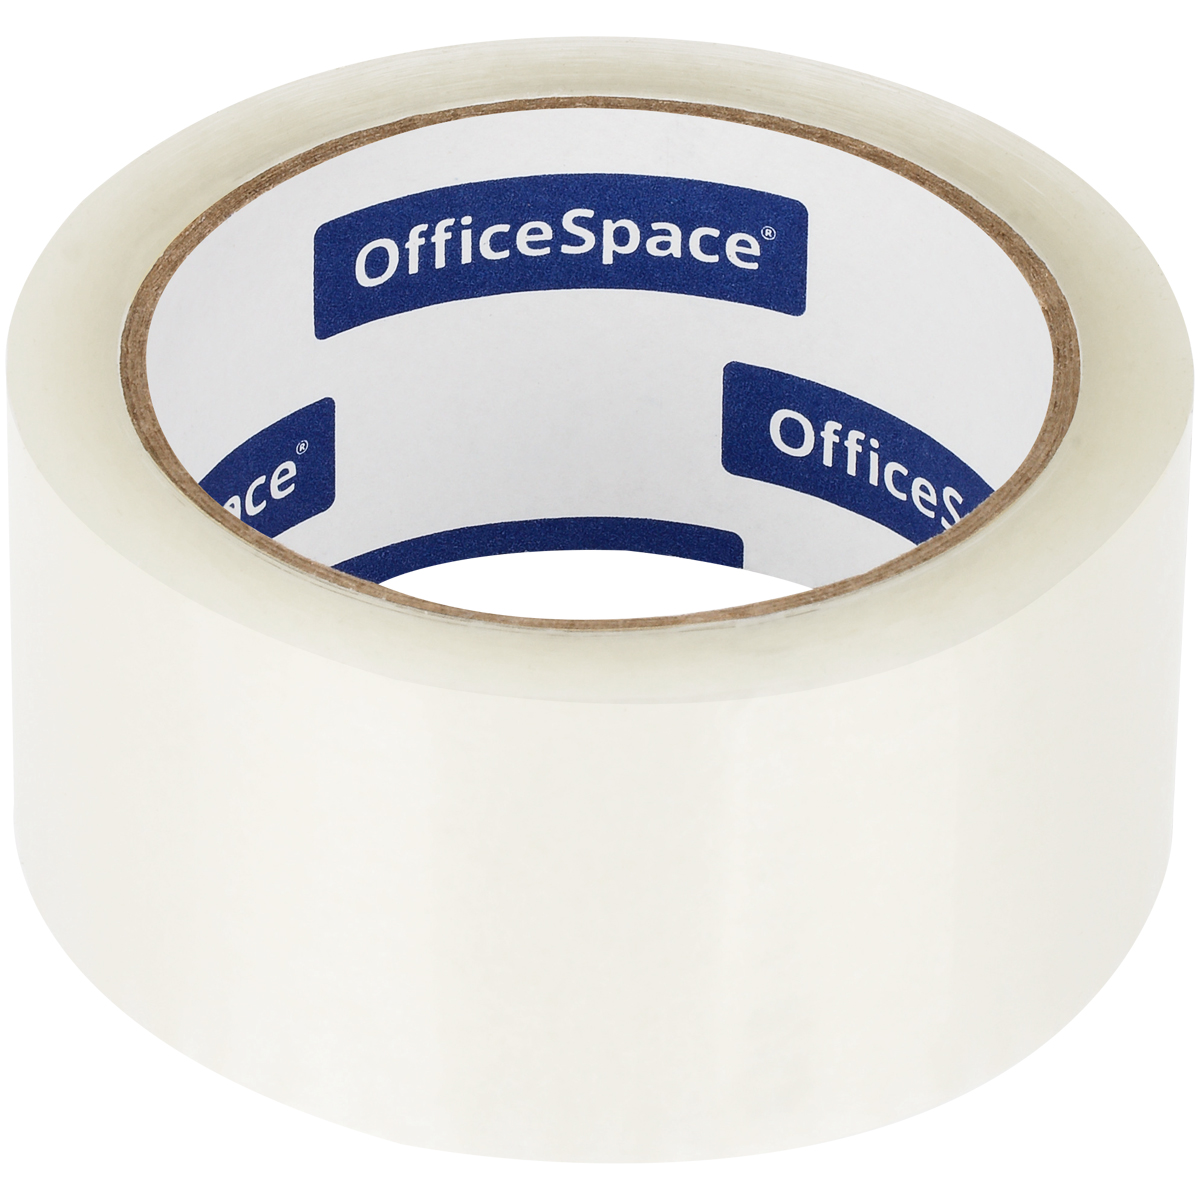    OfficeSpace, 48*66, 40,  6. 